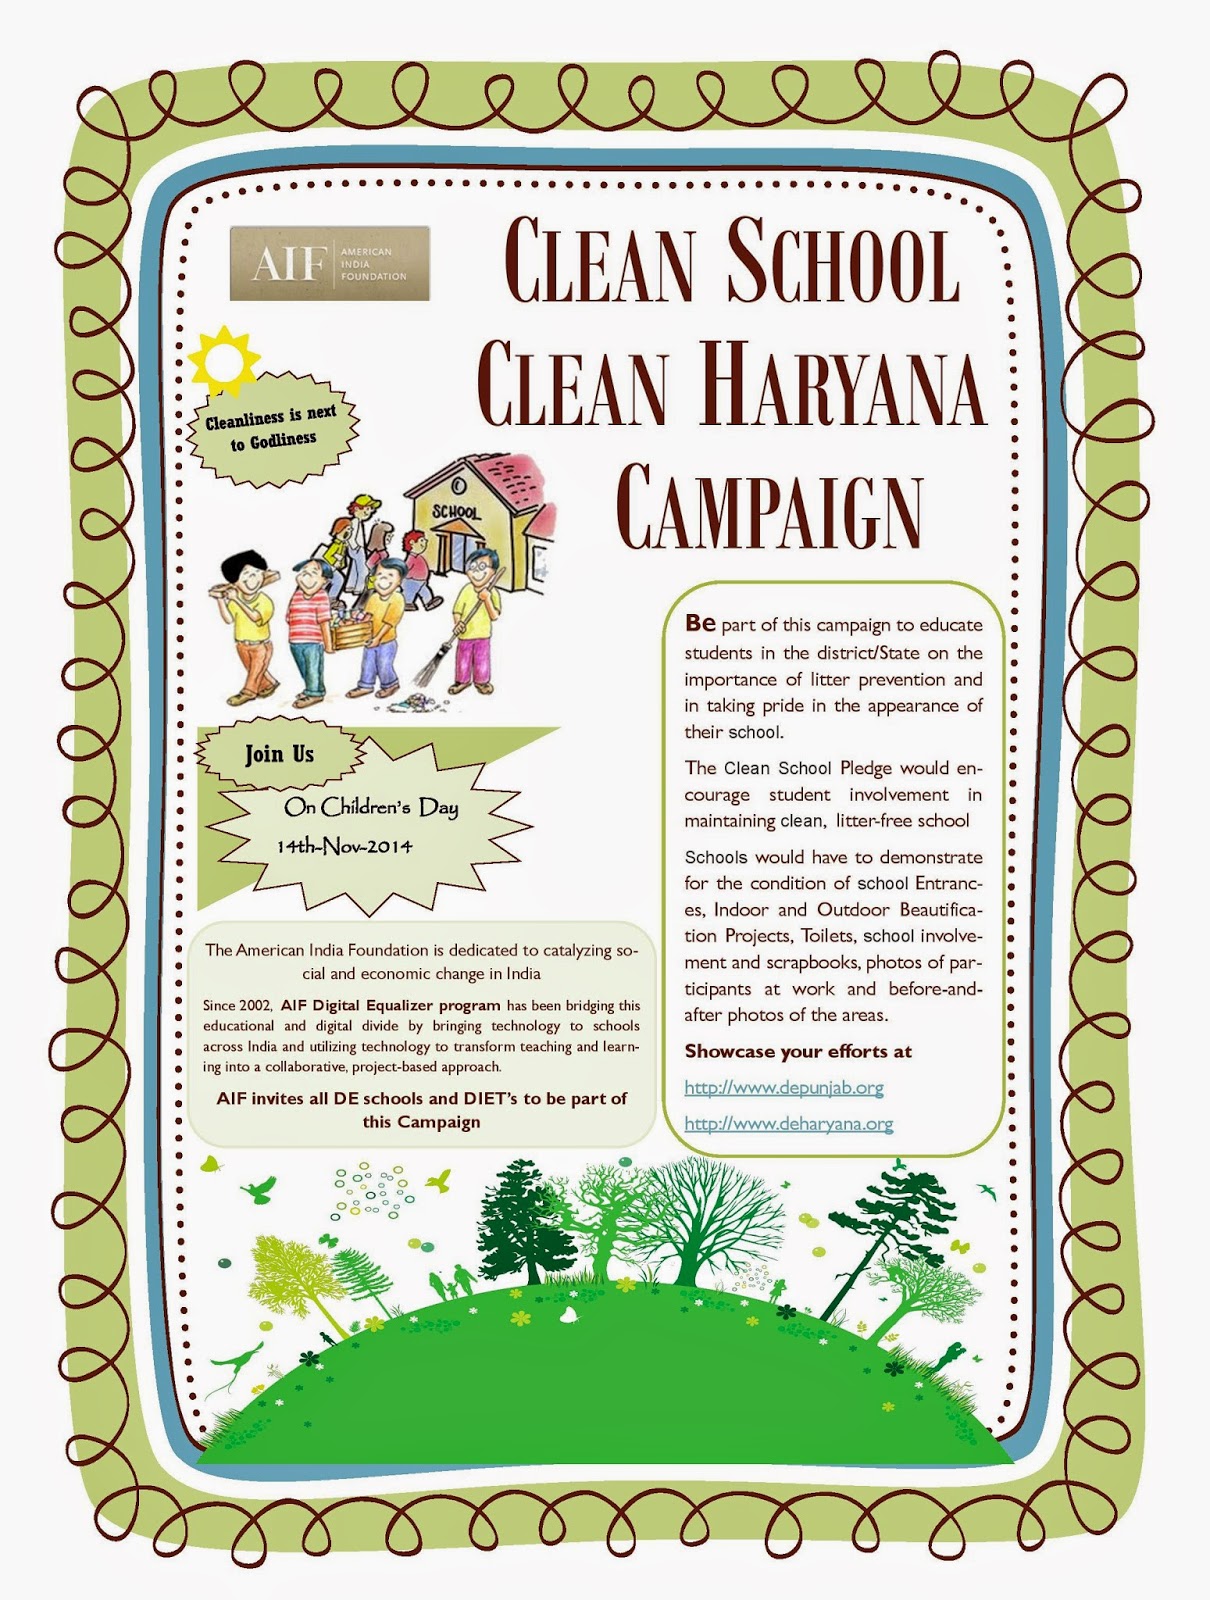 speech about keep your school clean campaign